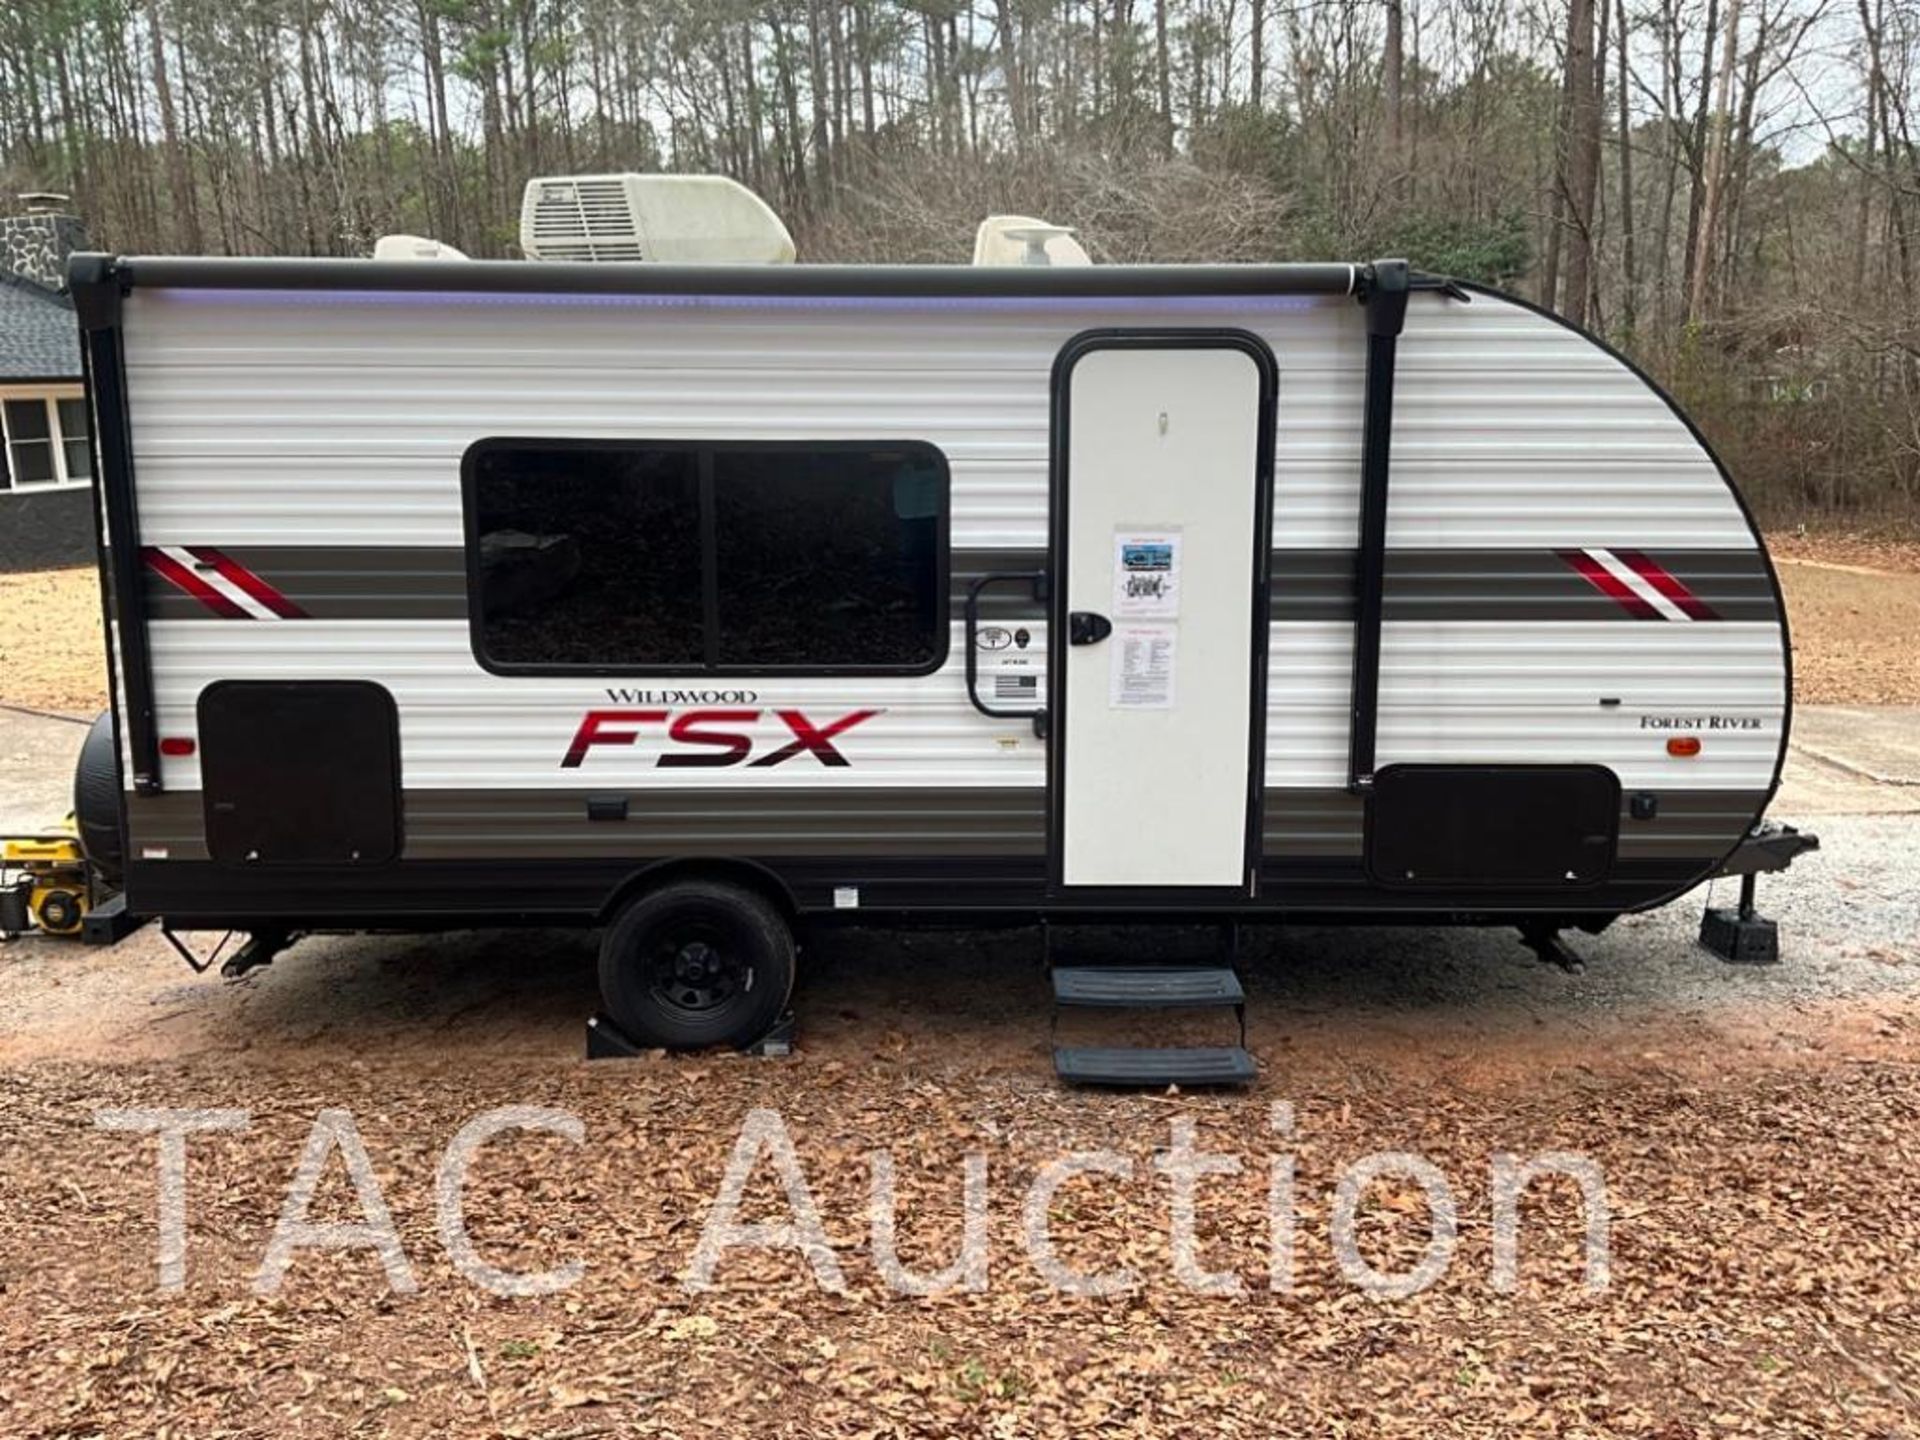 2021 Forest River Wildwood FSX 167RBK Bumper Pull Camper - Image 6 of 85